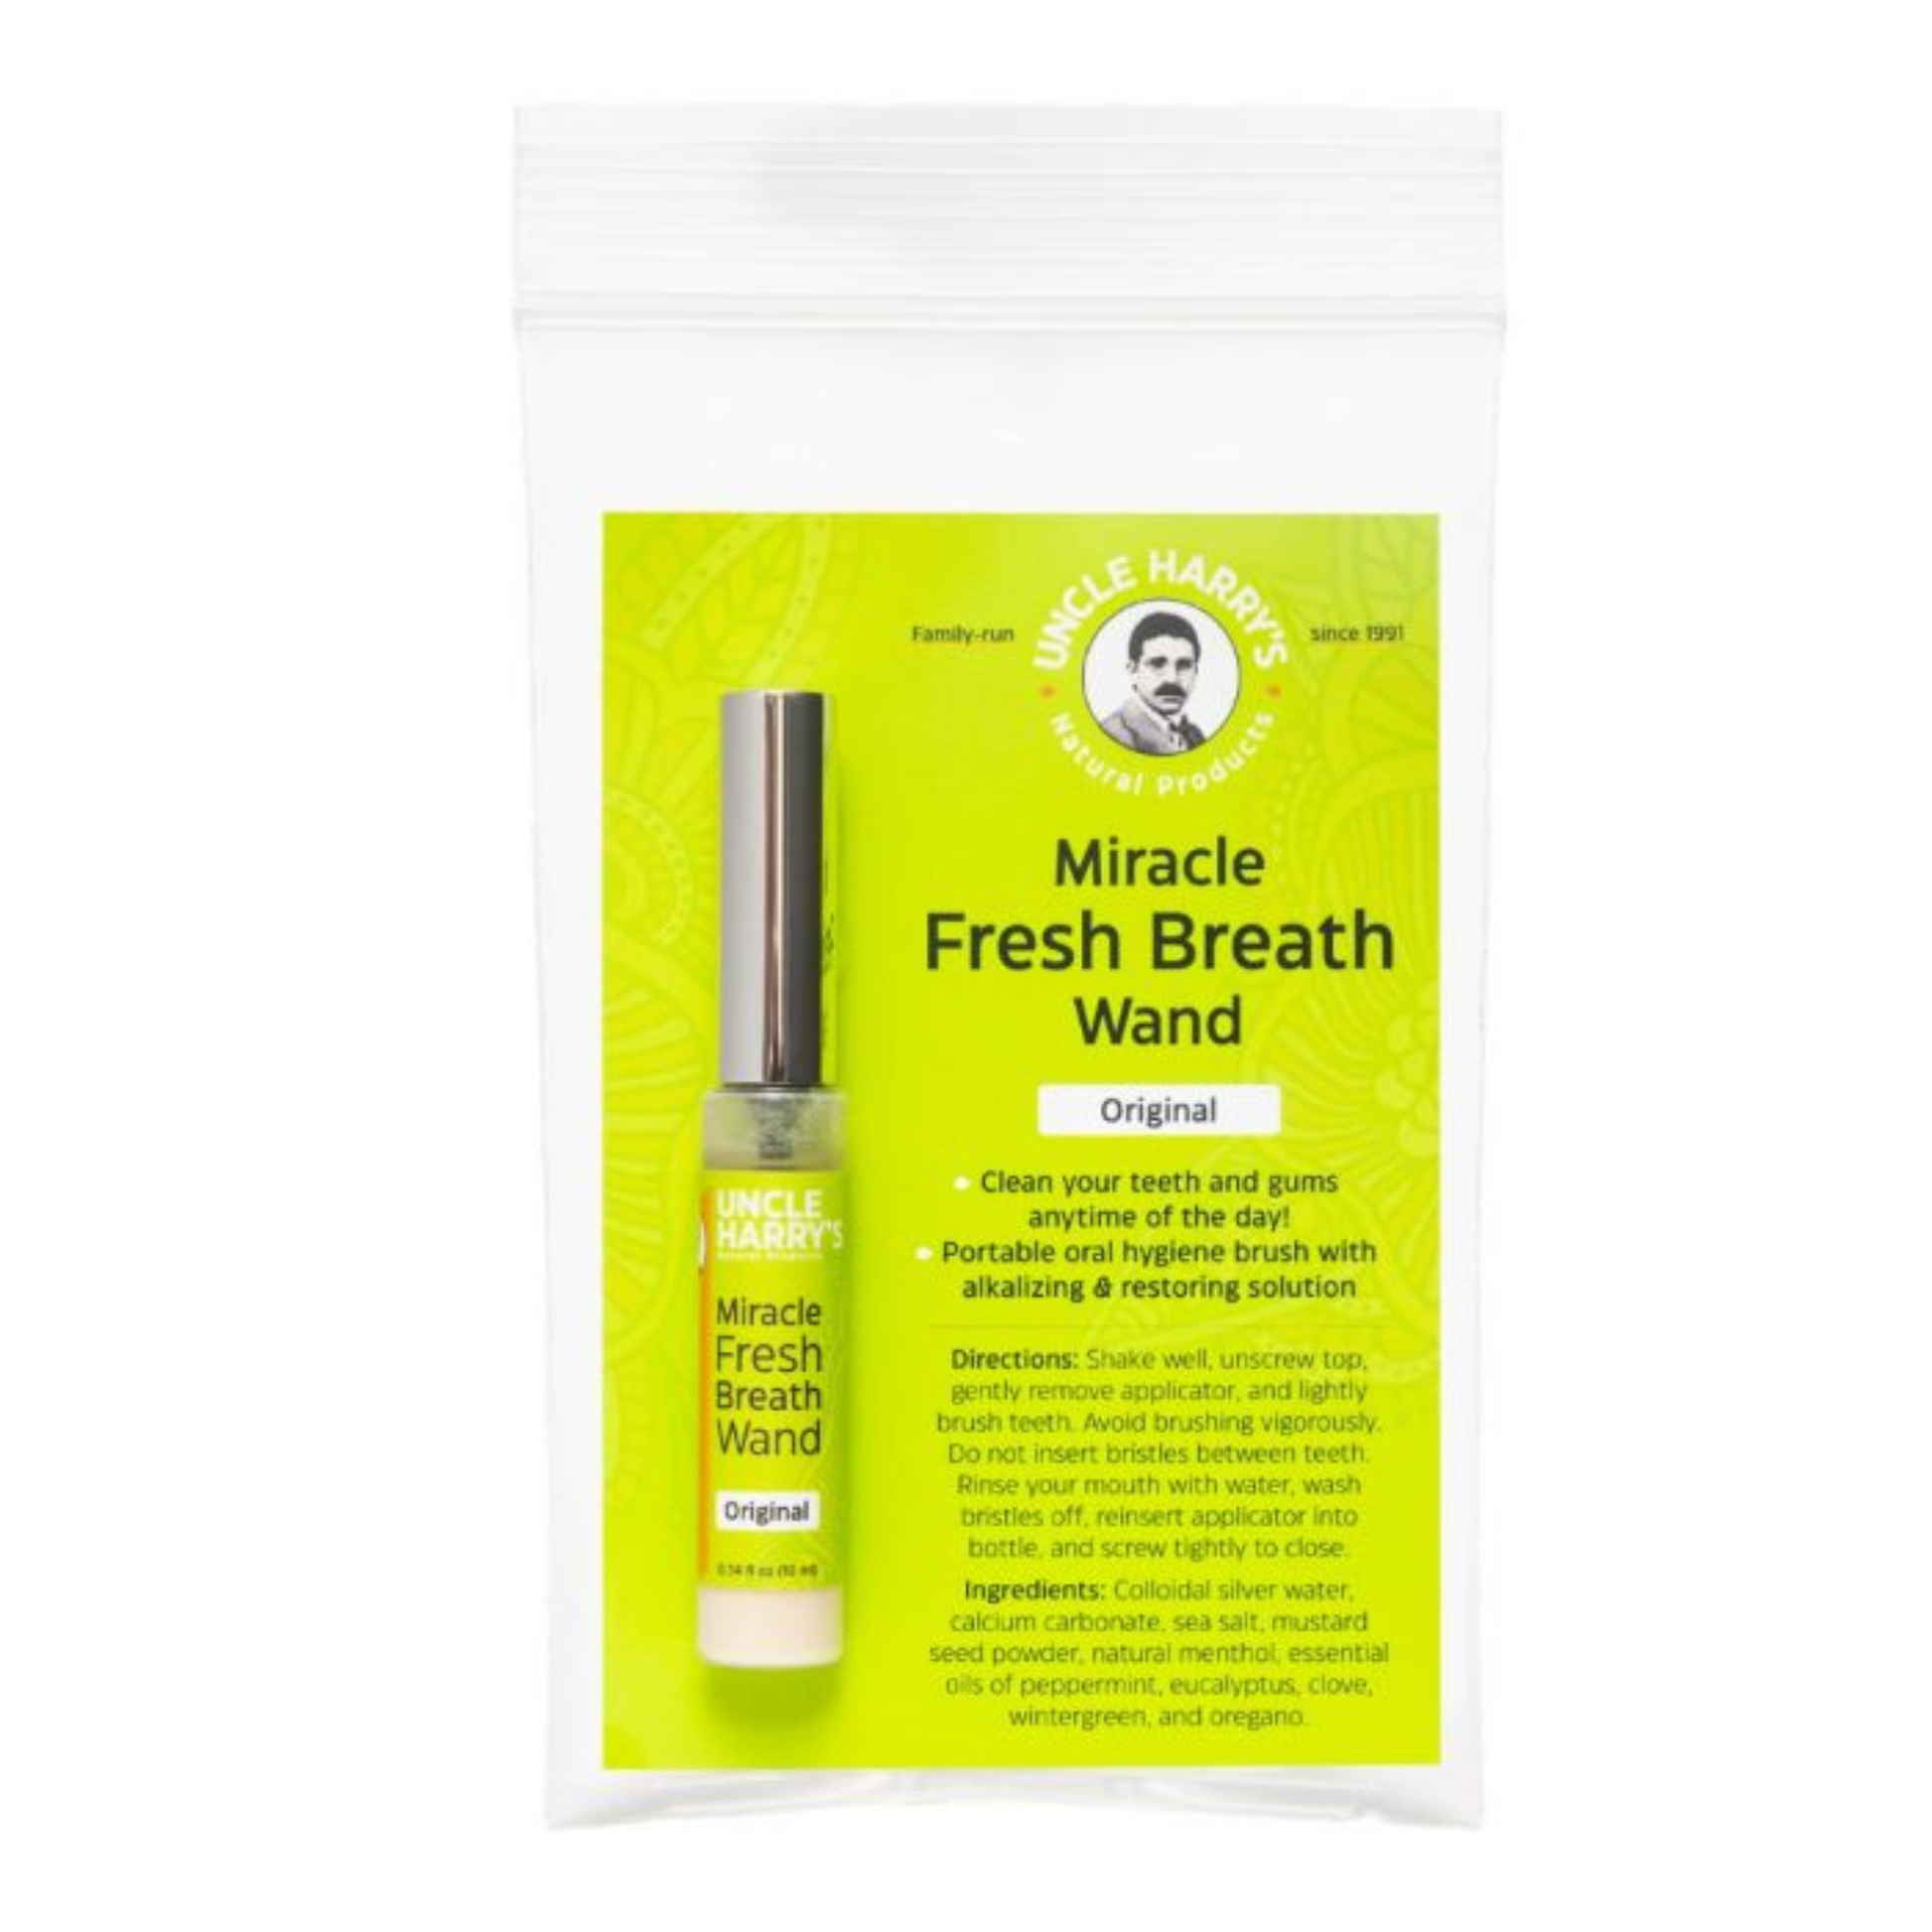 Primary image of Miracle Fresh Breath Wand